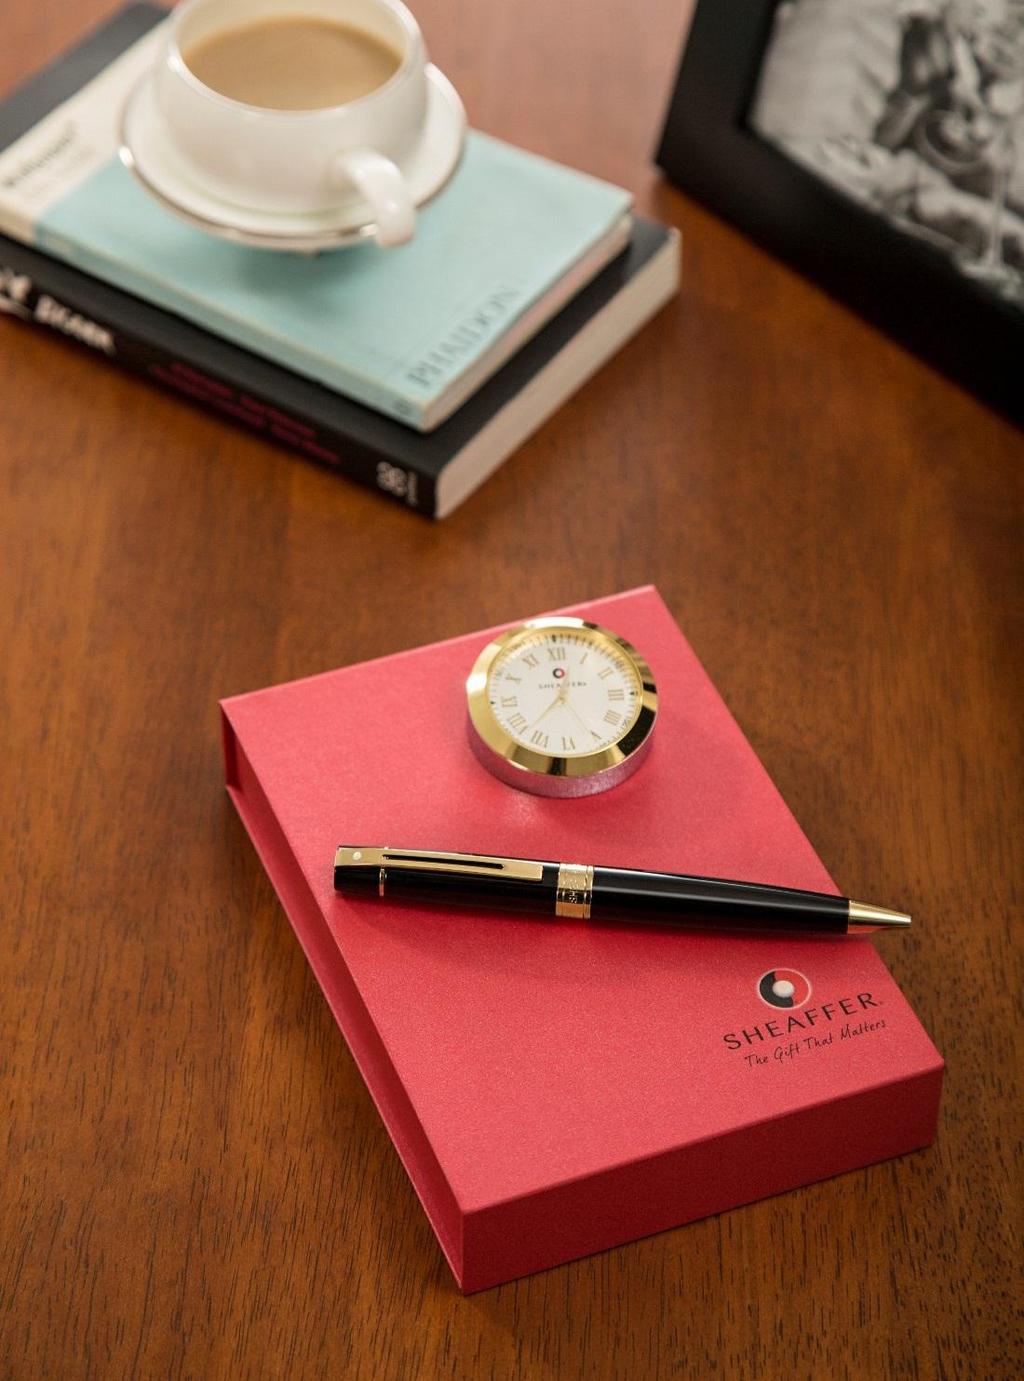 With the classy black-lacquered Sheaffer 9325 Ball Pen and stylish Sheaffer